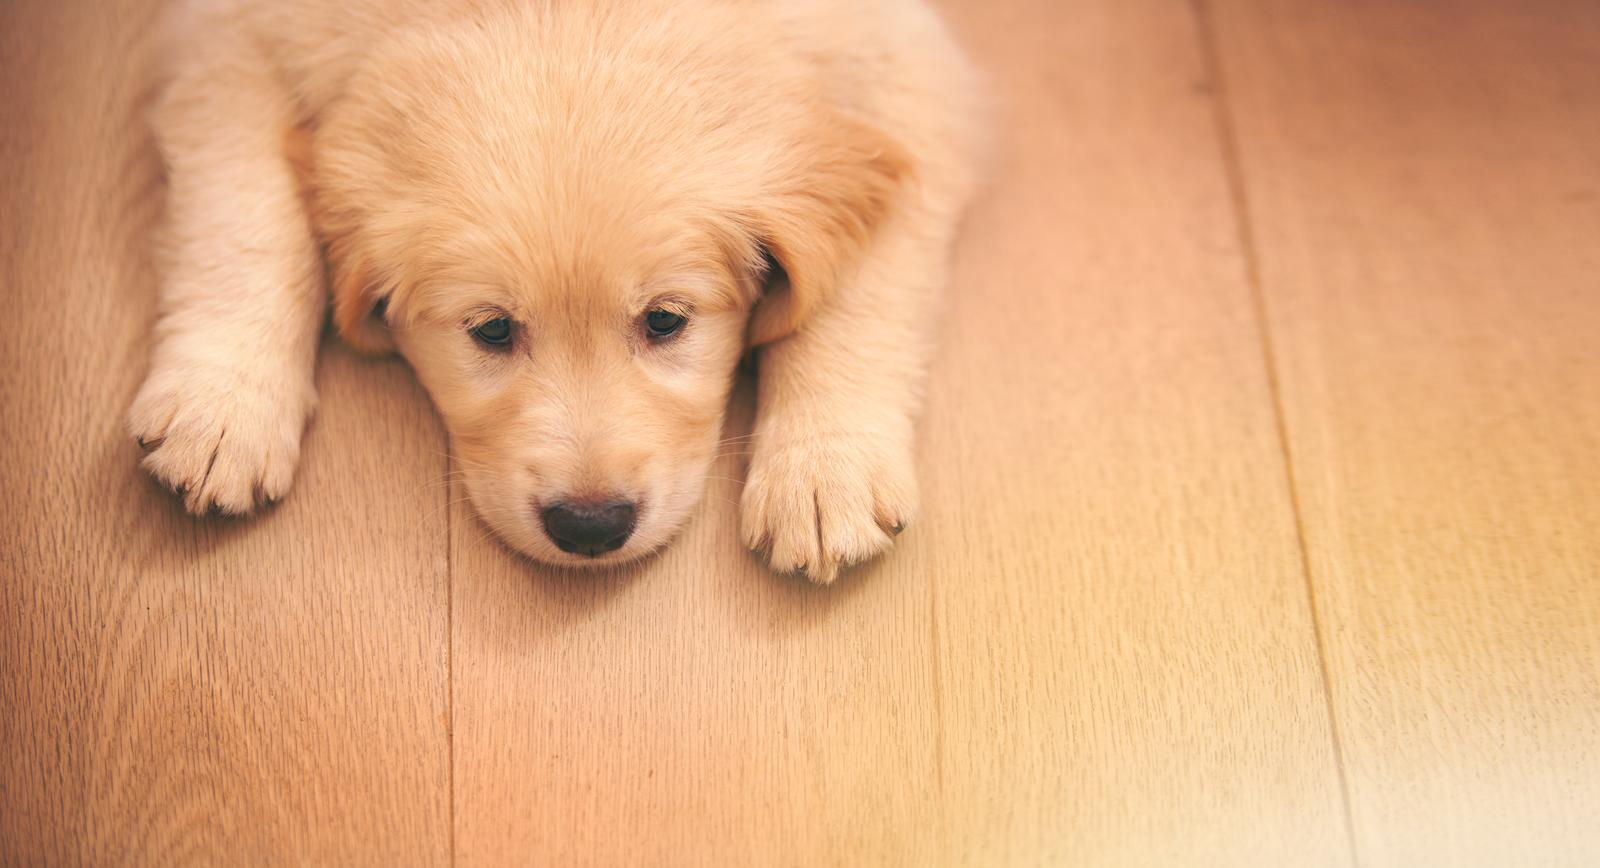 All about golden retriever and labrador breed mix